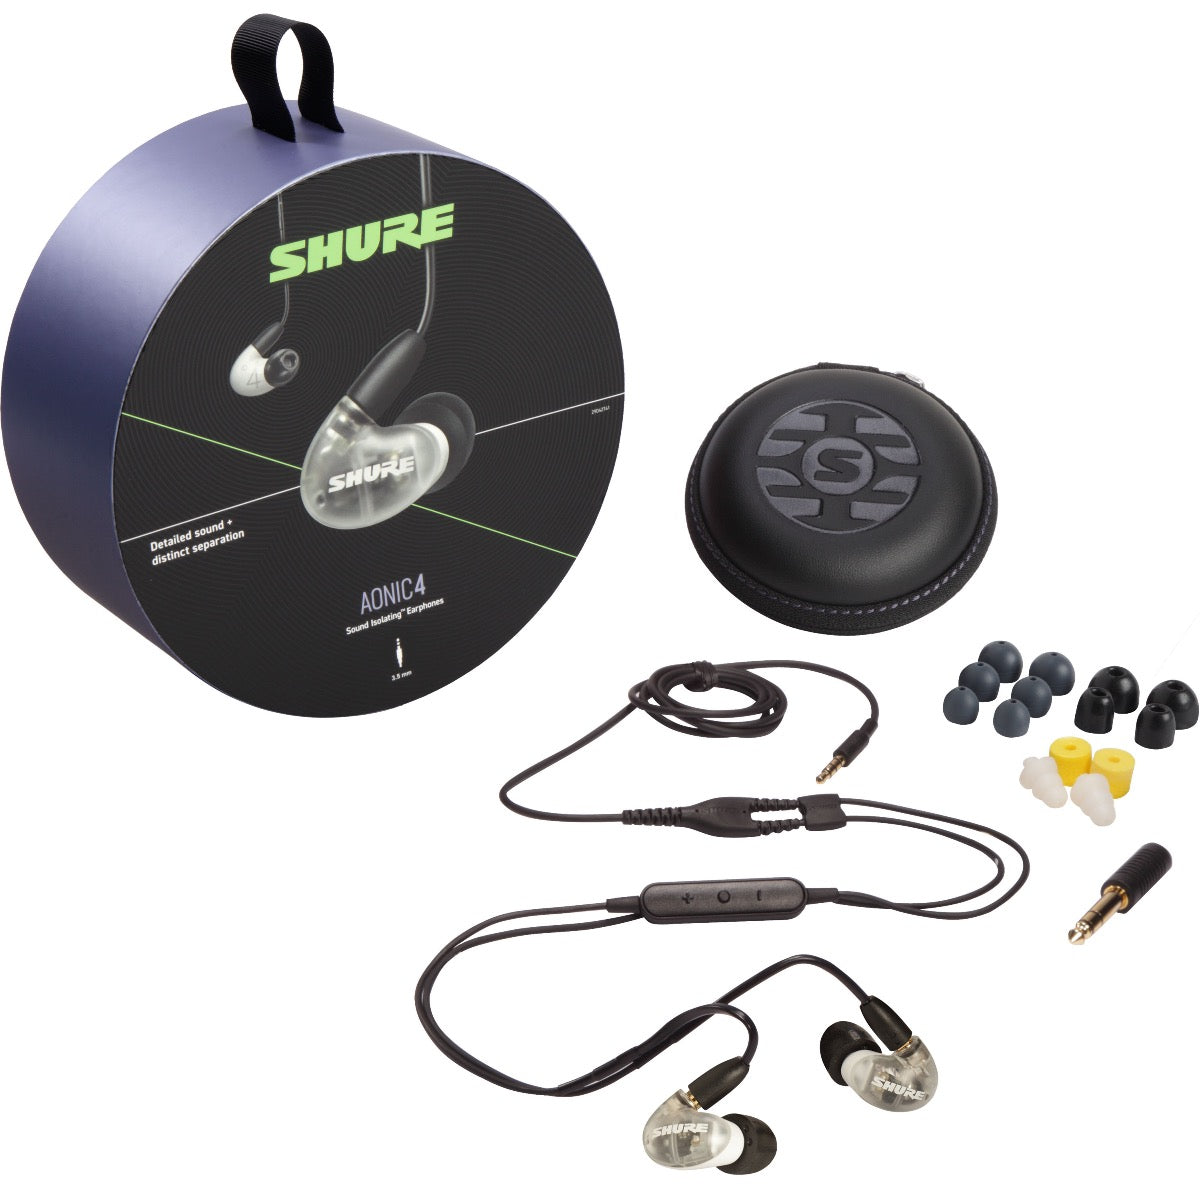 3/4 view of Shure AONIC 4 Sound Isolating Earphones - Clear/White packaging and components showing front, top and left sides